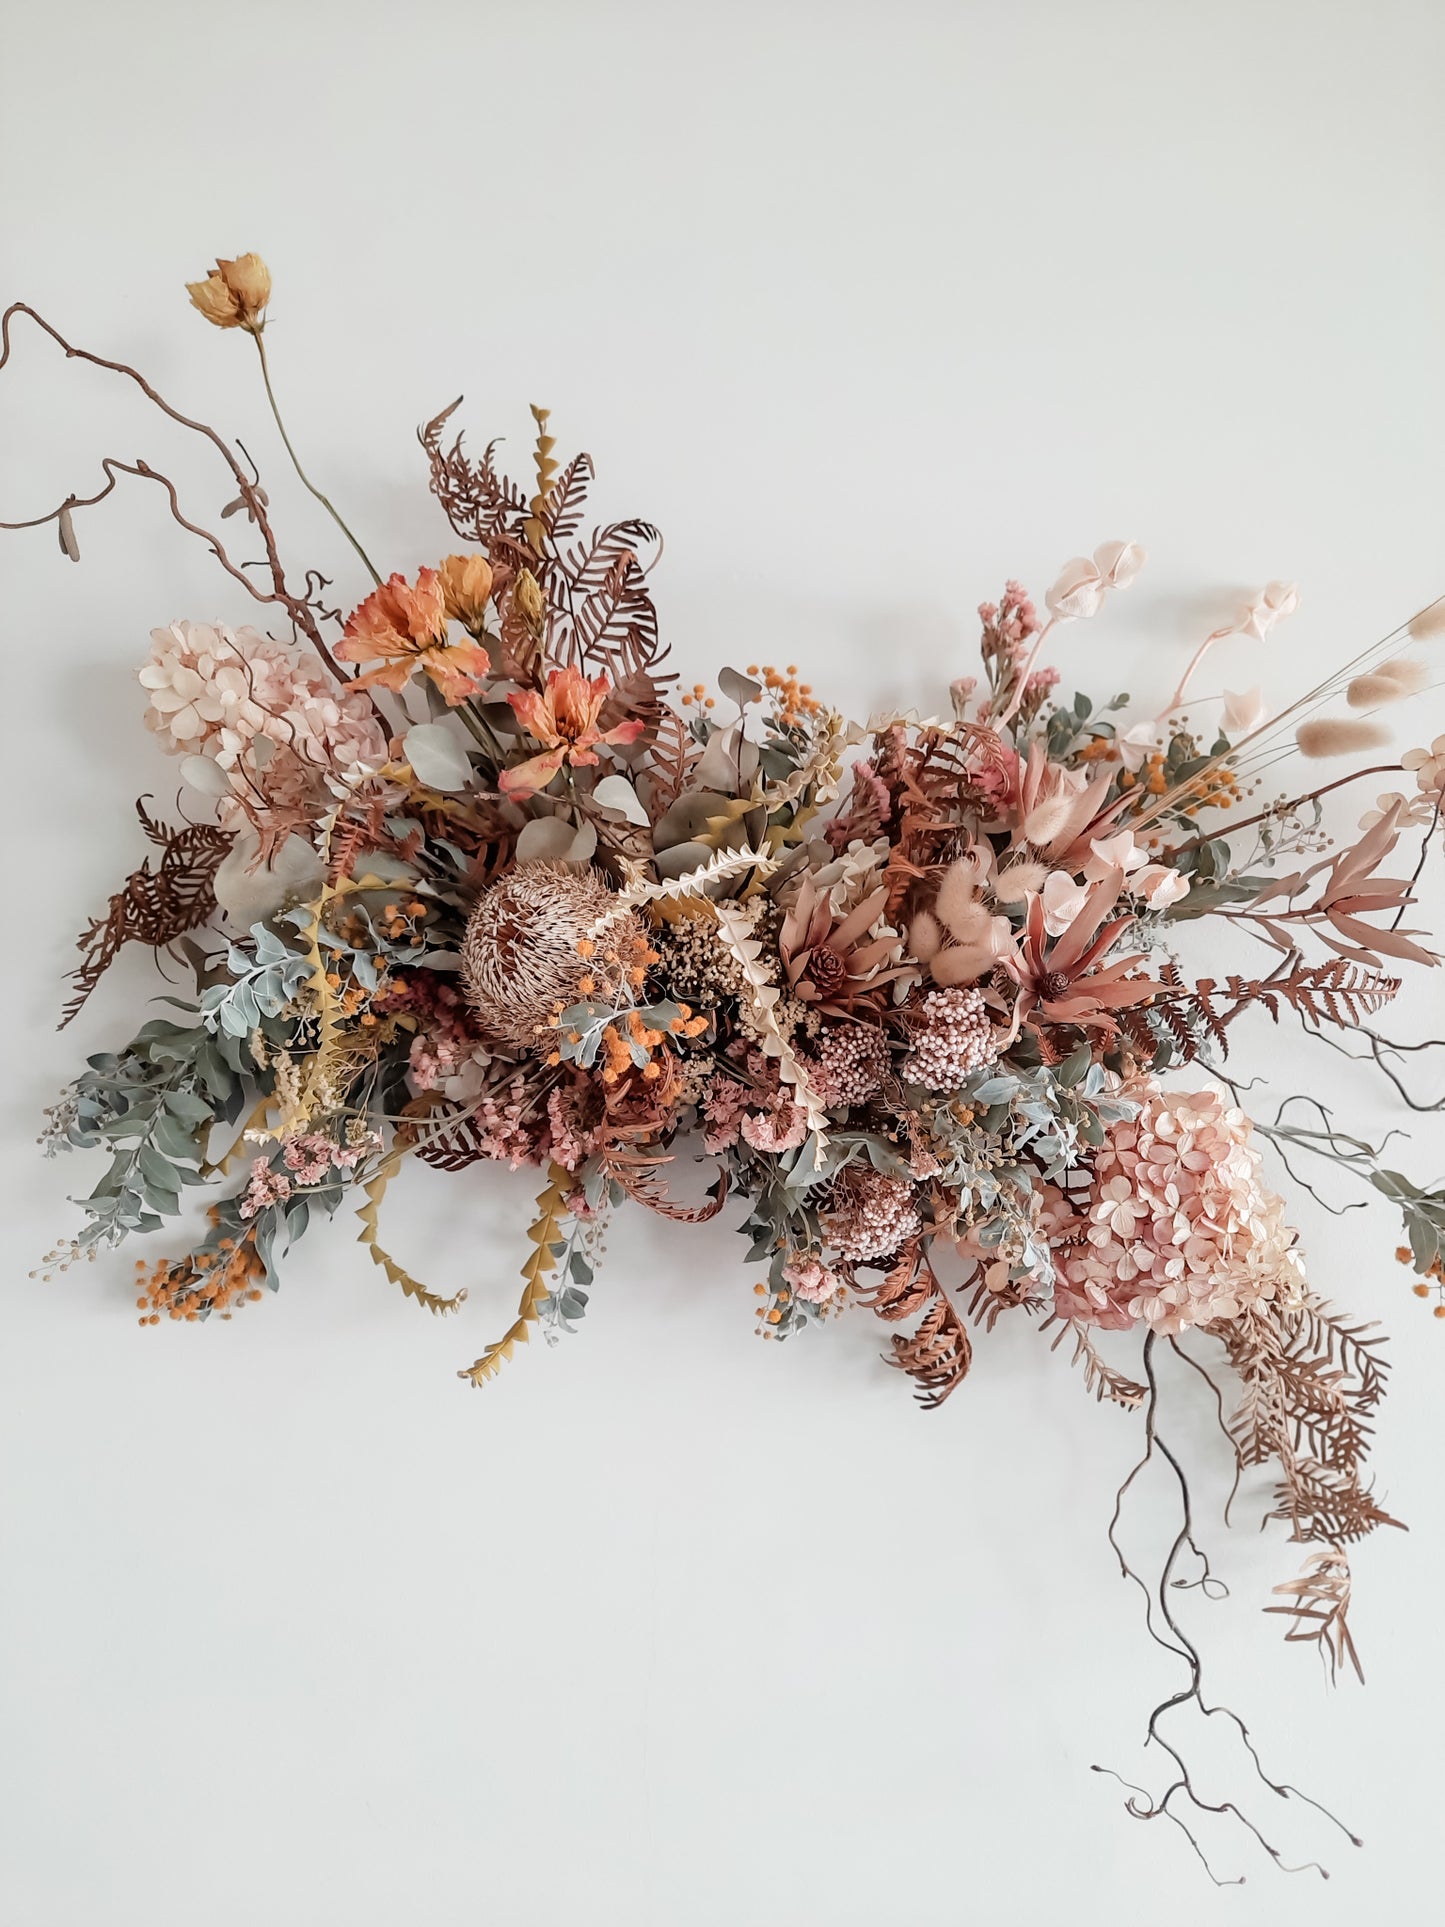 Dried flower wall hanging in pastel tones – close full view.